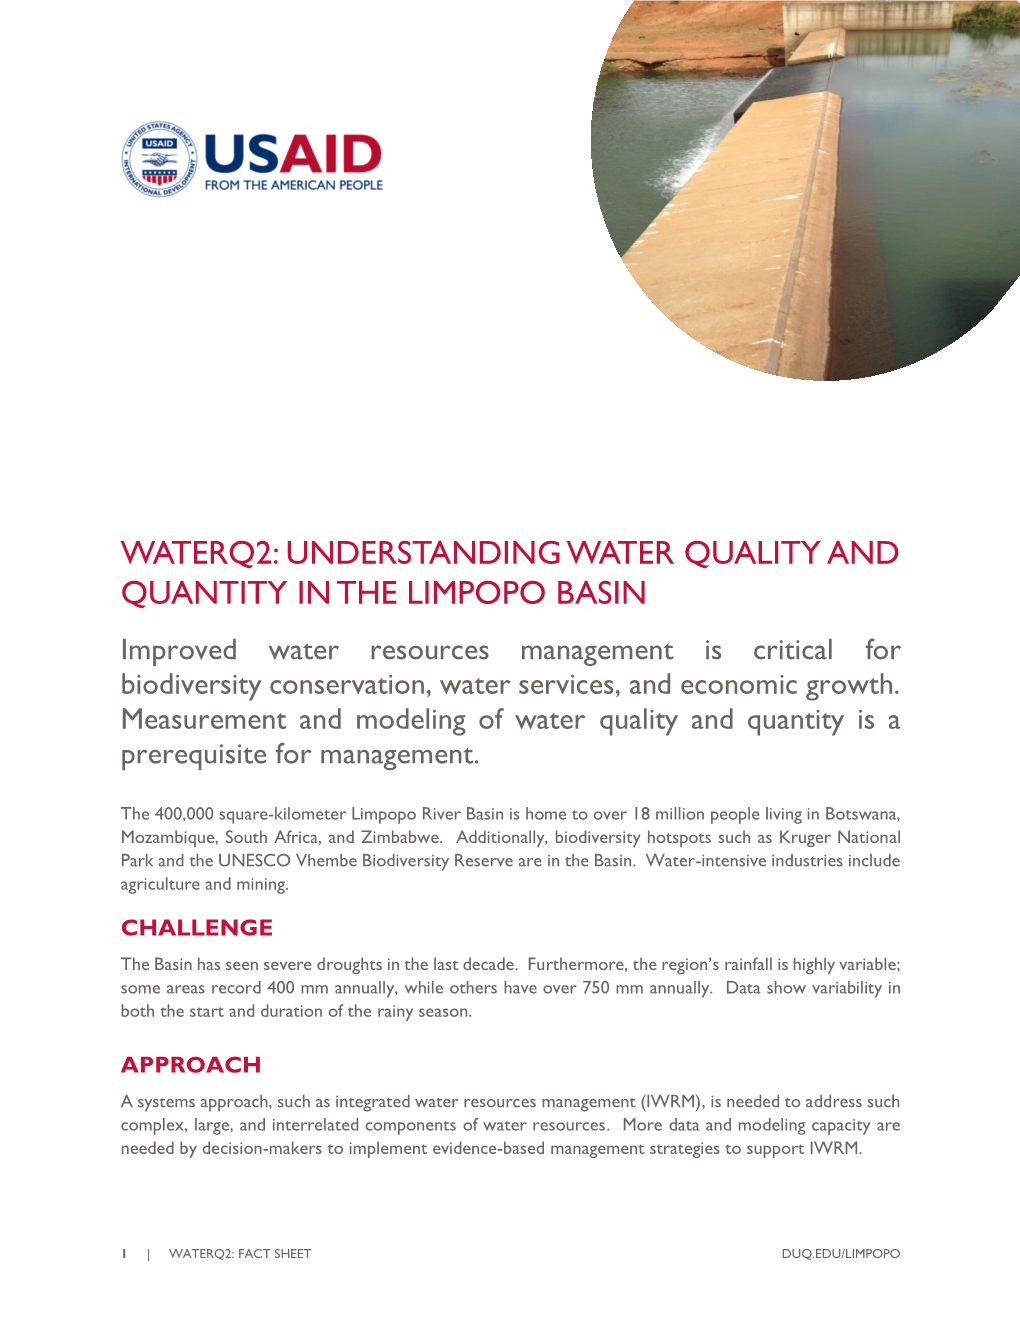 Waterq2: Understanding Water Quality and Quantity in the Limpopo